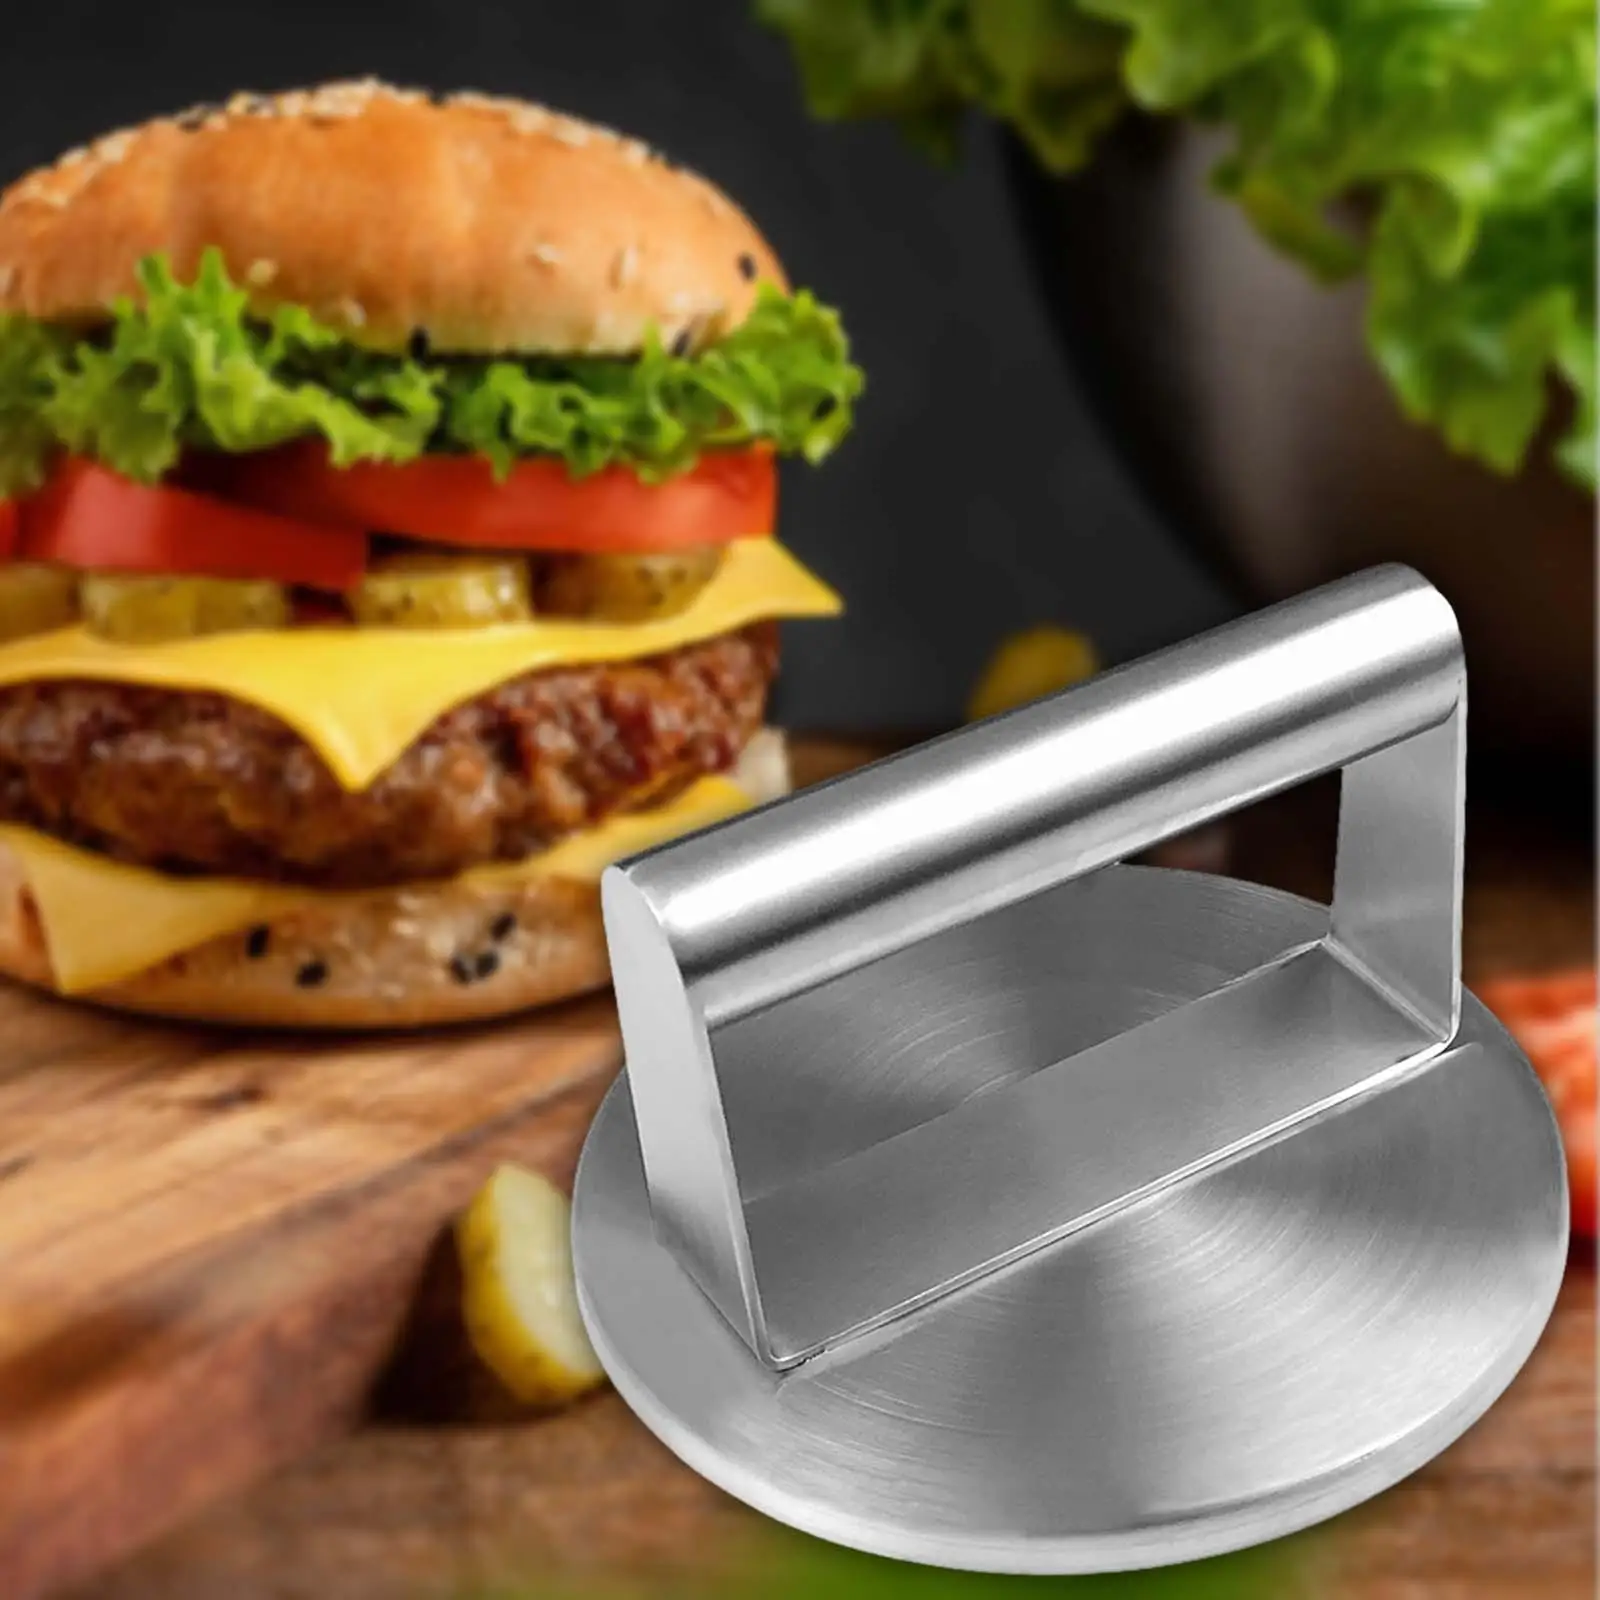 Stainless Steel Burger Press Press Meat Steak Flat Bottom Ground Meat Masher for BBQ Steak Making Grilling Tool